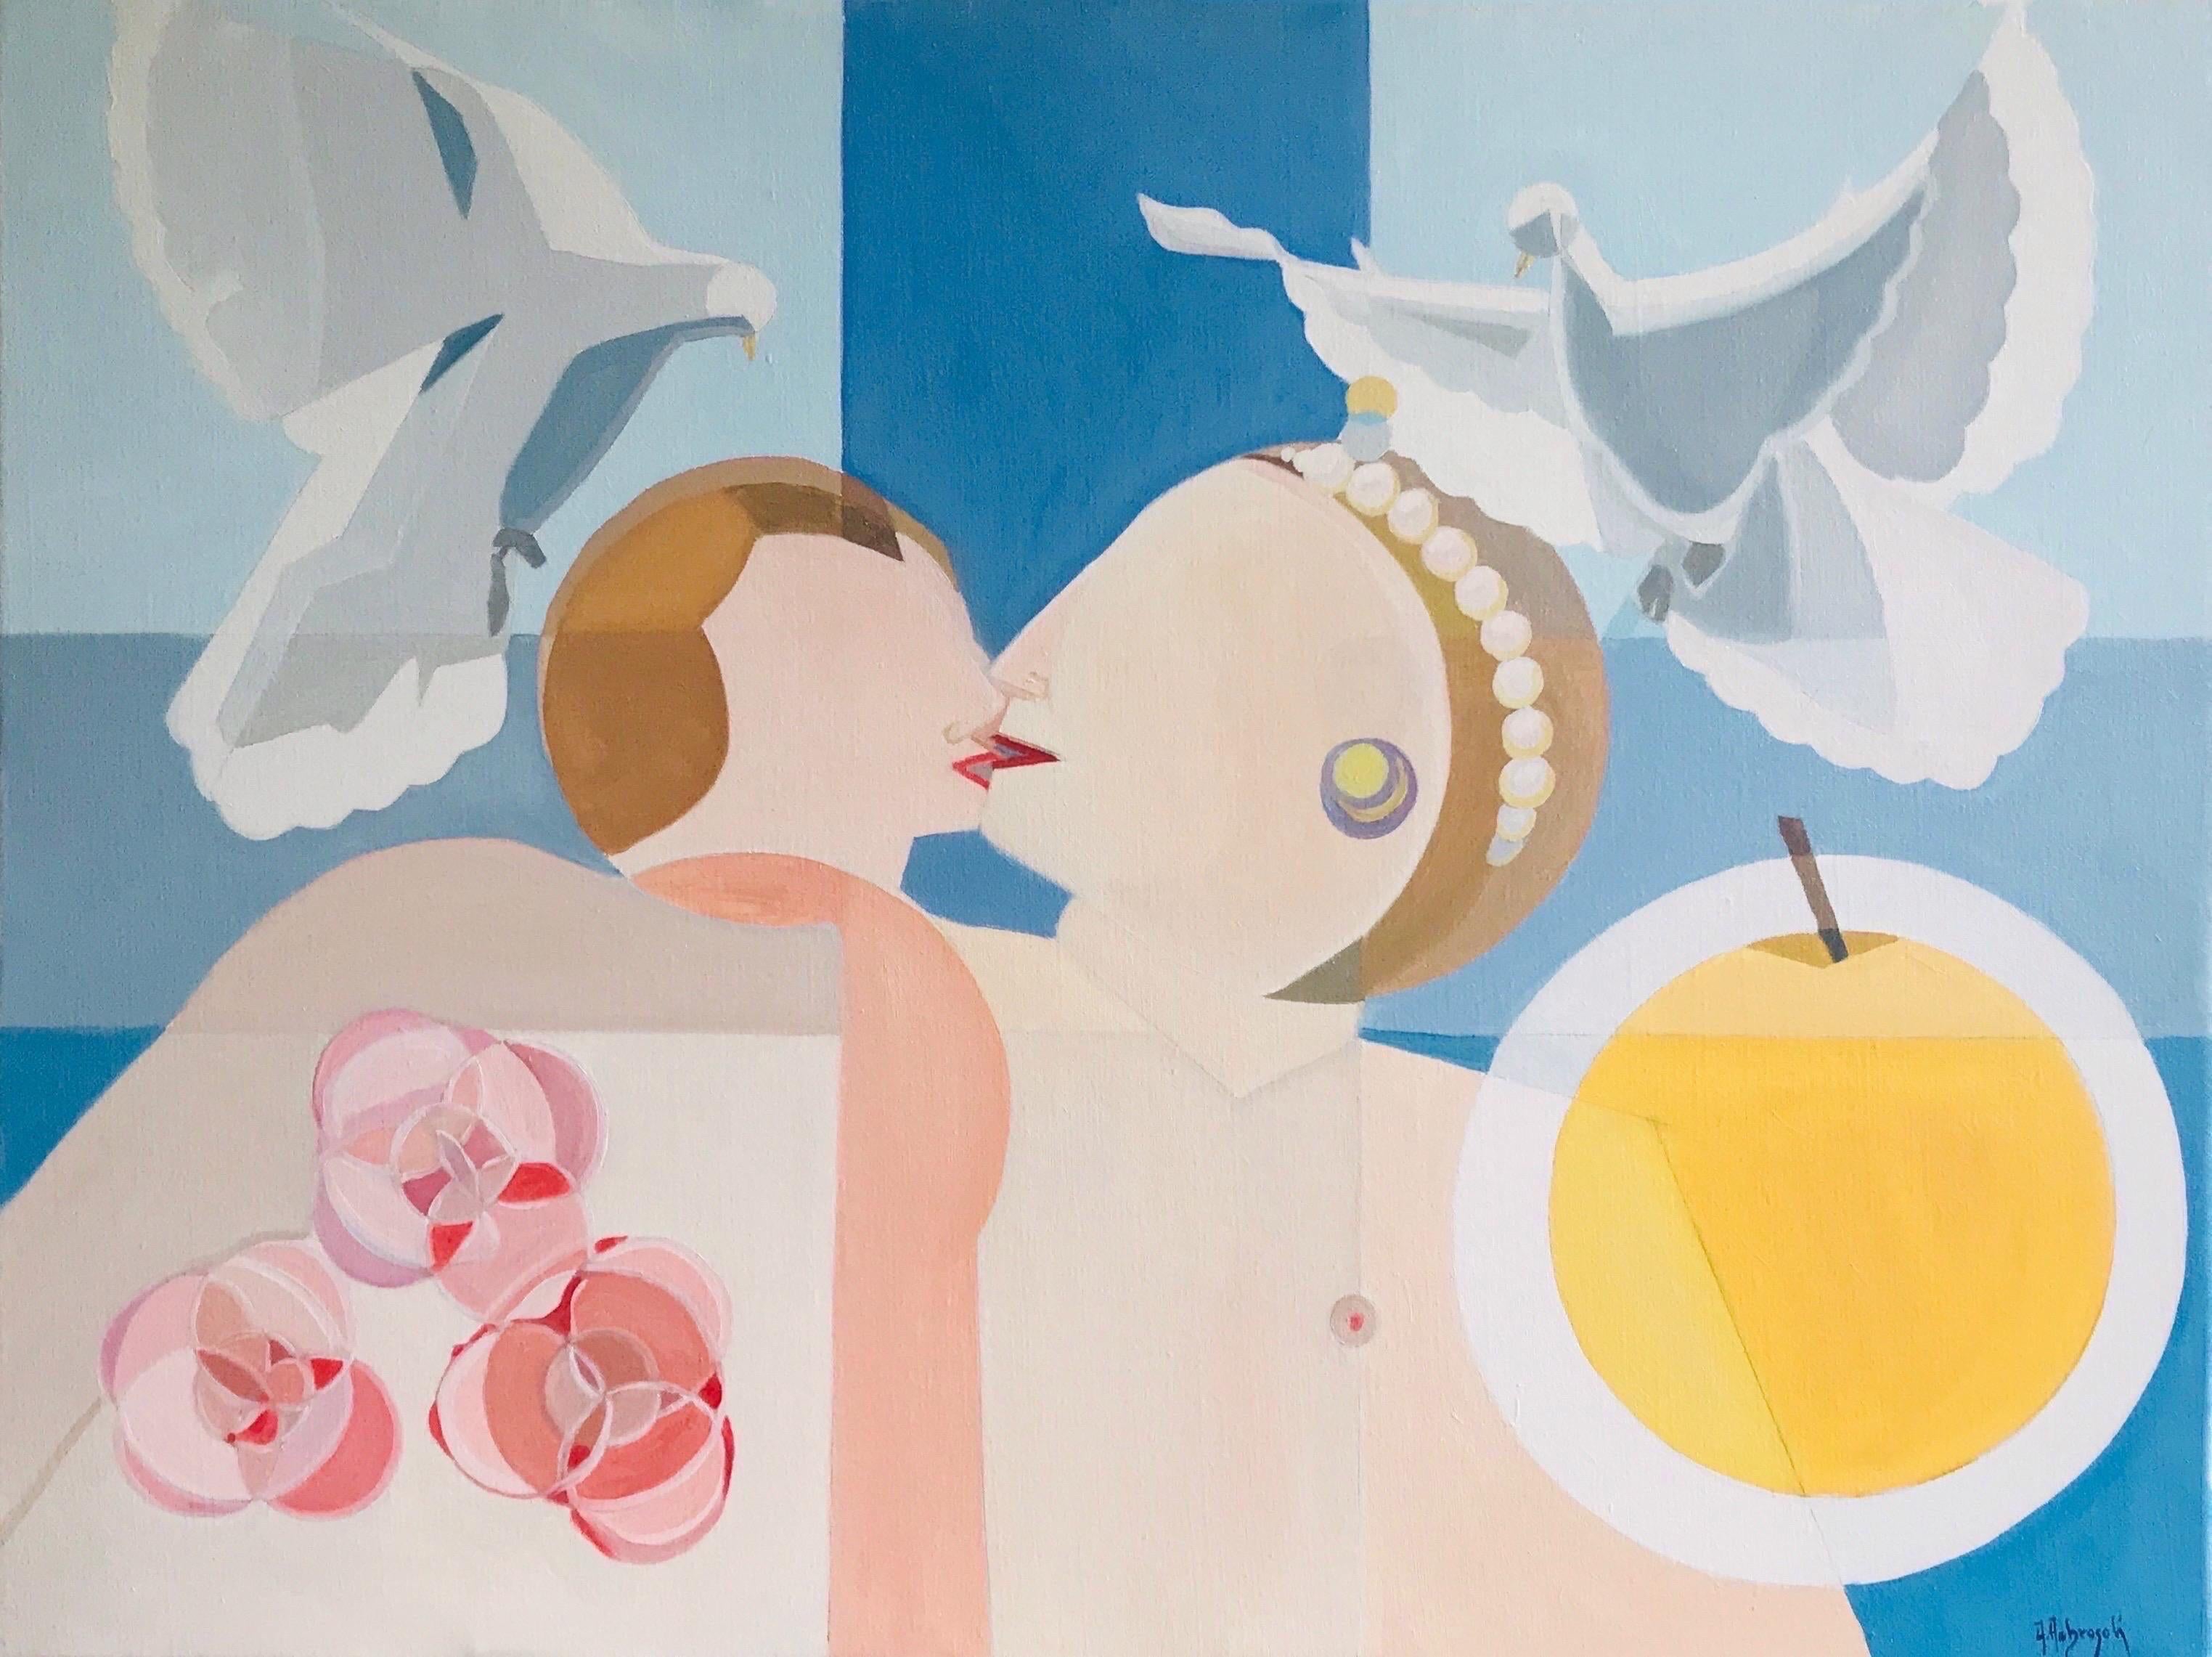 Venus and Amor (2016), oil on canvas stretched over wooden frame, 60x80 cm, by Italian contemporary artist ©Annemarie Ambrosoli (ICA - International Certified Artist)

Hand-signed by the Artist front lower right, dated and signed on verso of the